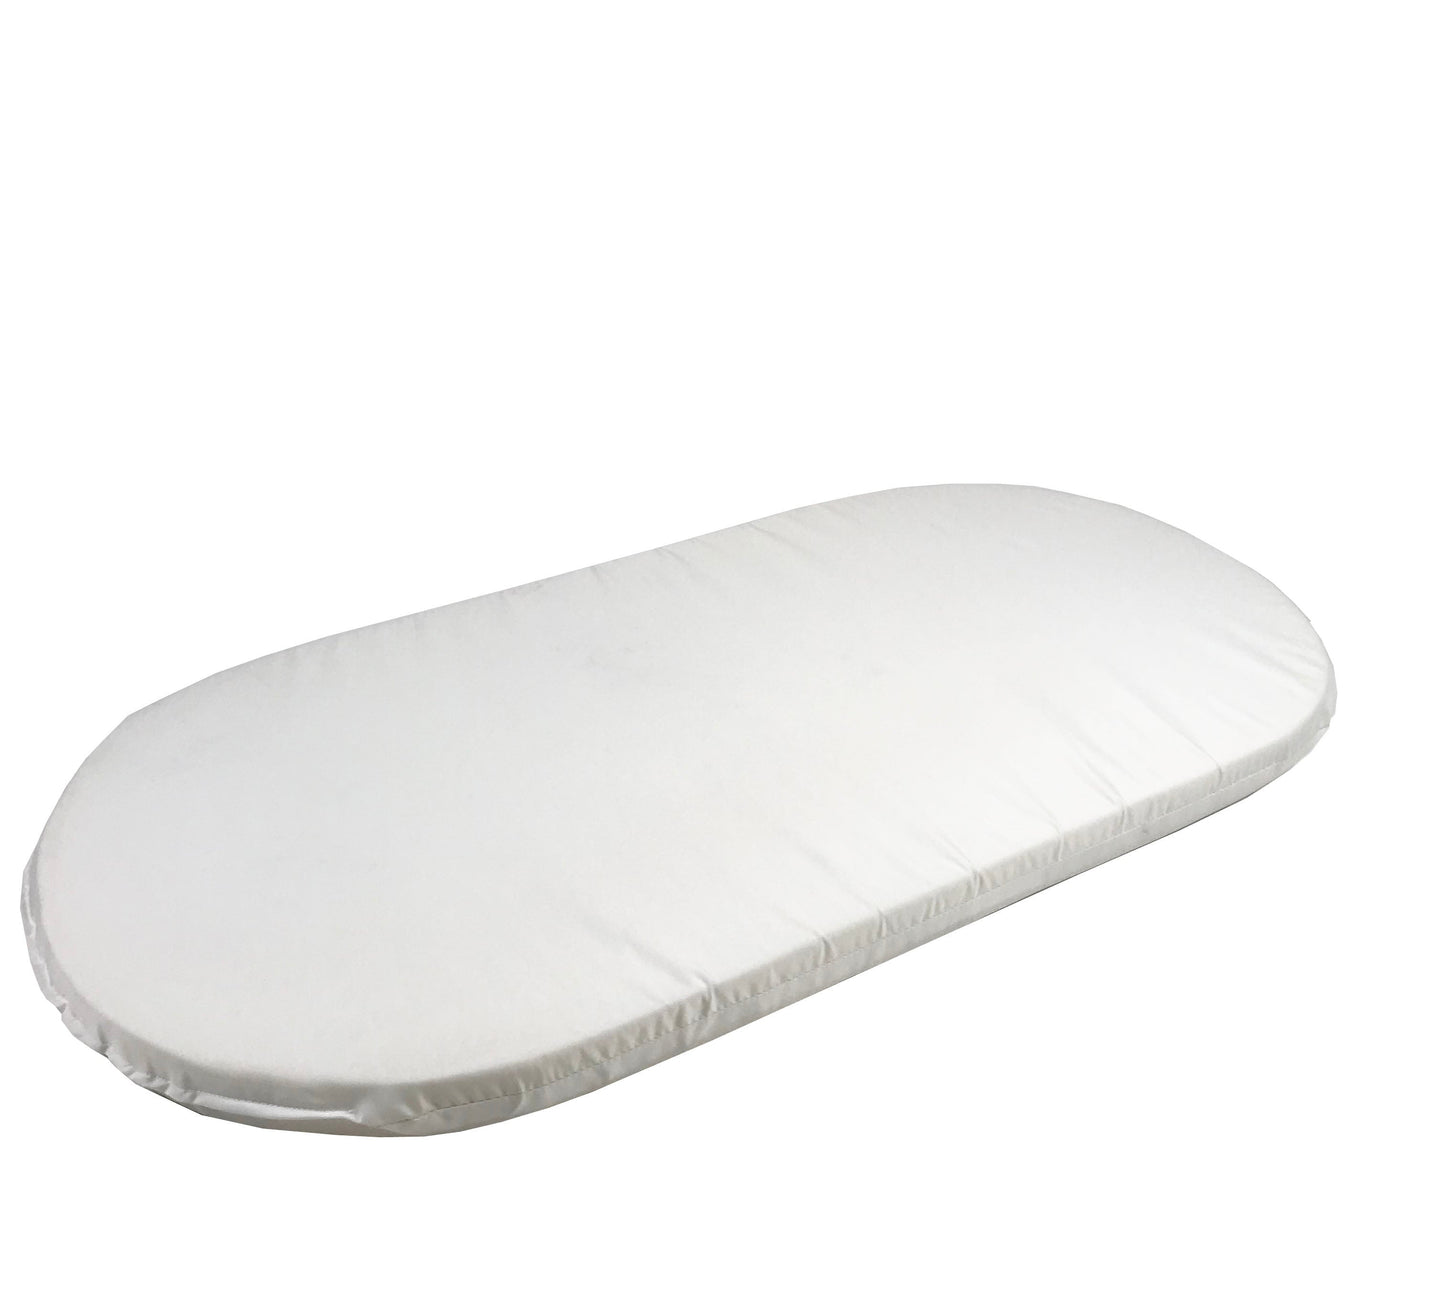 Covered Foam Mattress Pad - 1.5 inches Thick - Wrapped in Waterproof Material - Custom Made Size and Shape